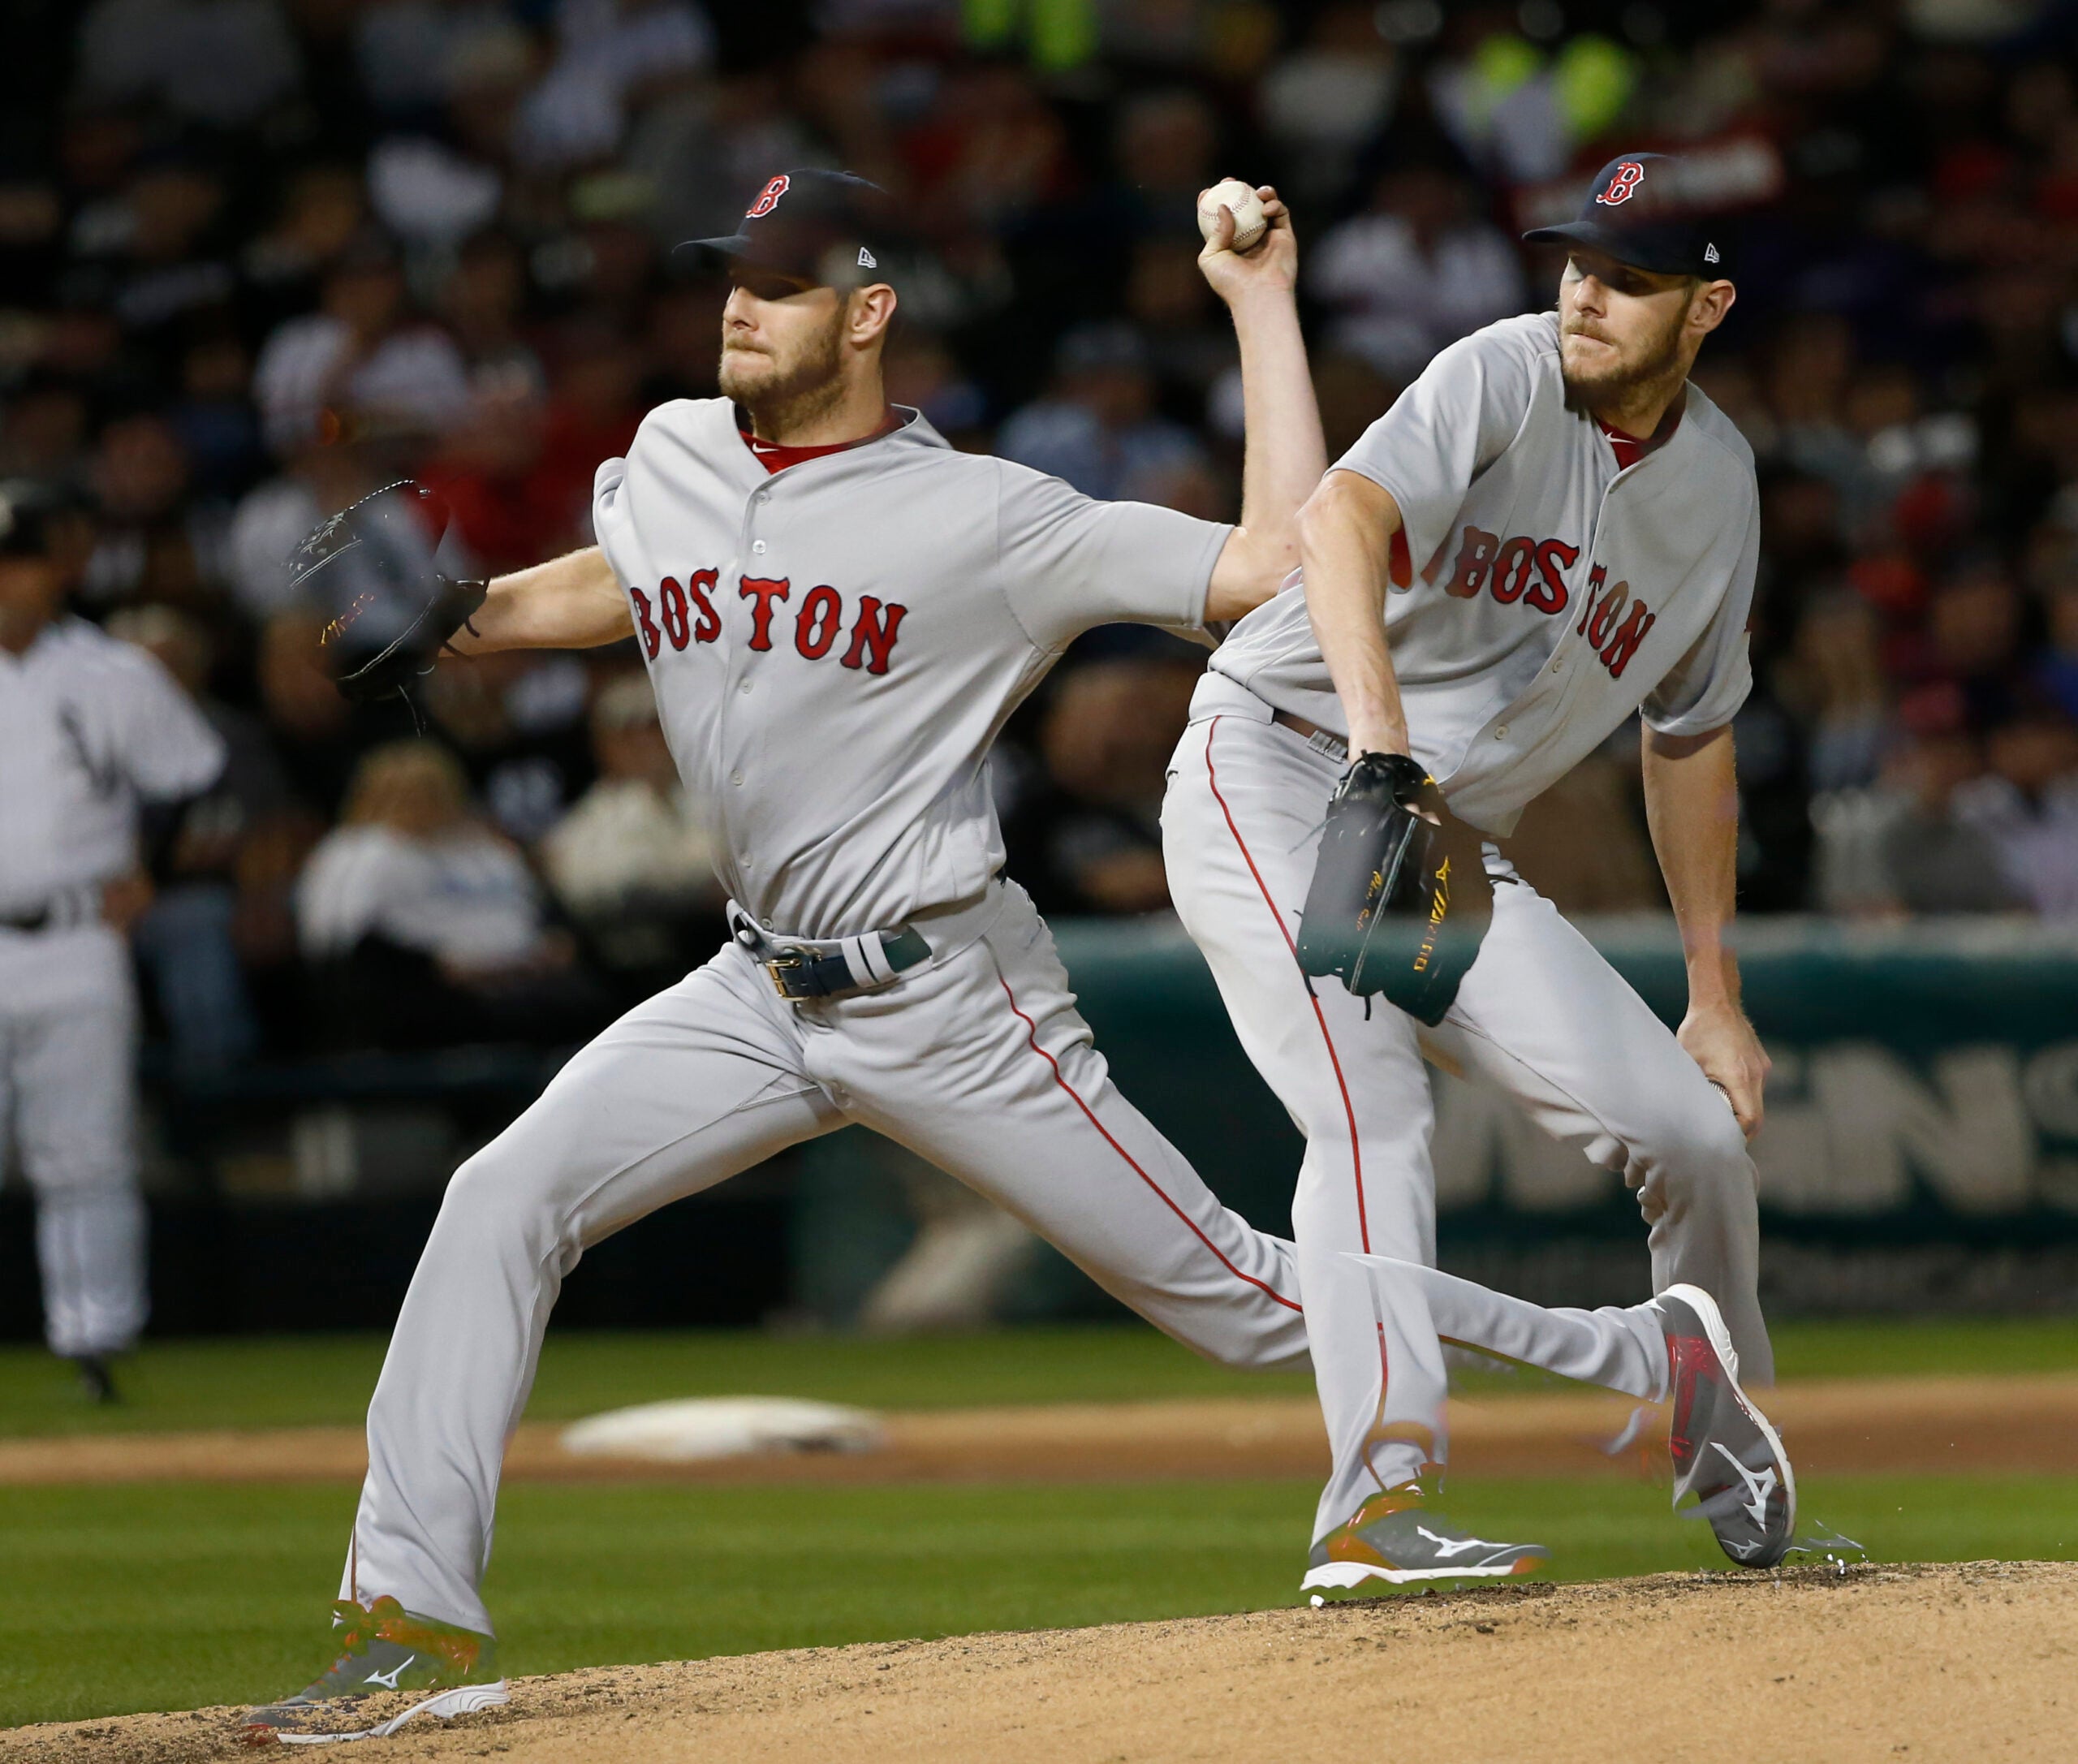 Boston Red Sox have a dilemma with closer Craig Kimbrel